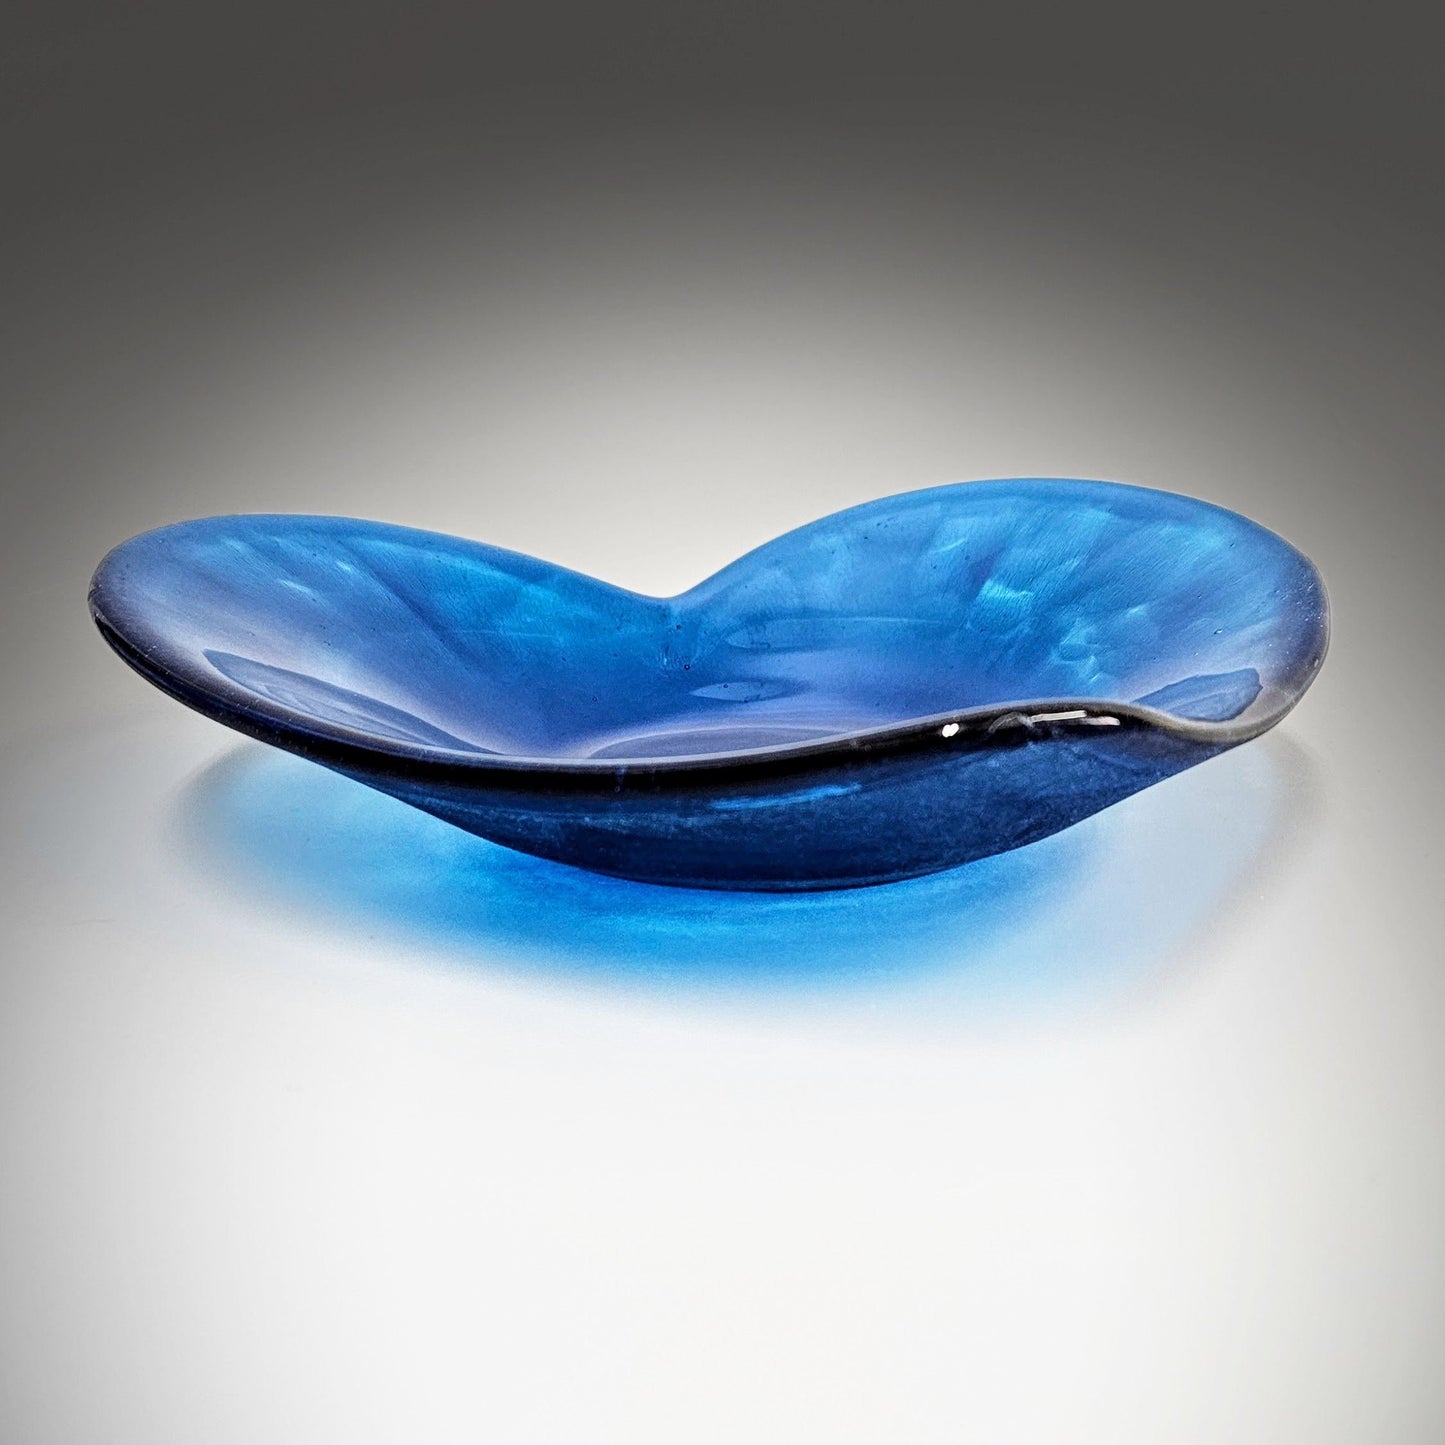 Glass Art Heart Shaped Bowl in Turquoise Blue | Seashell Display Bowl